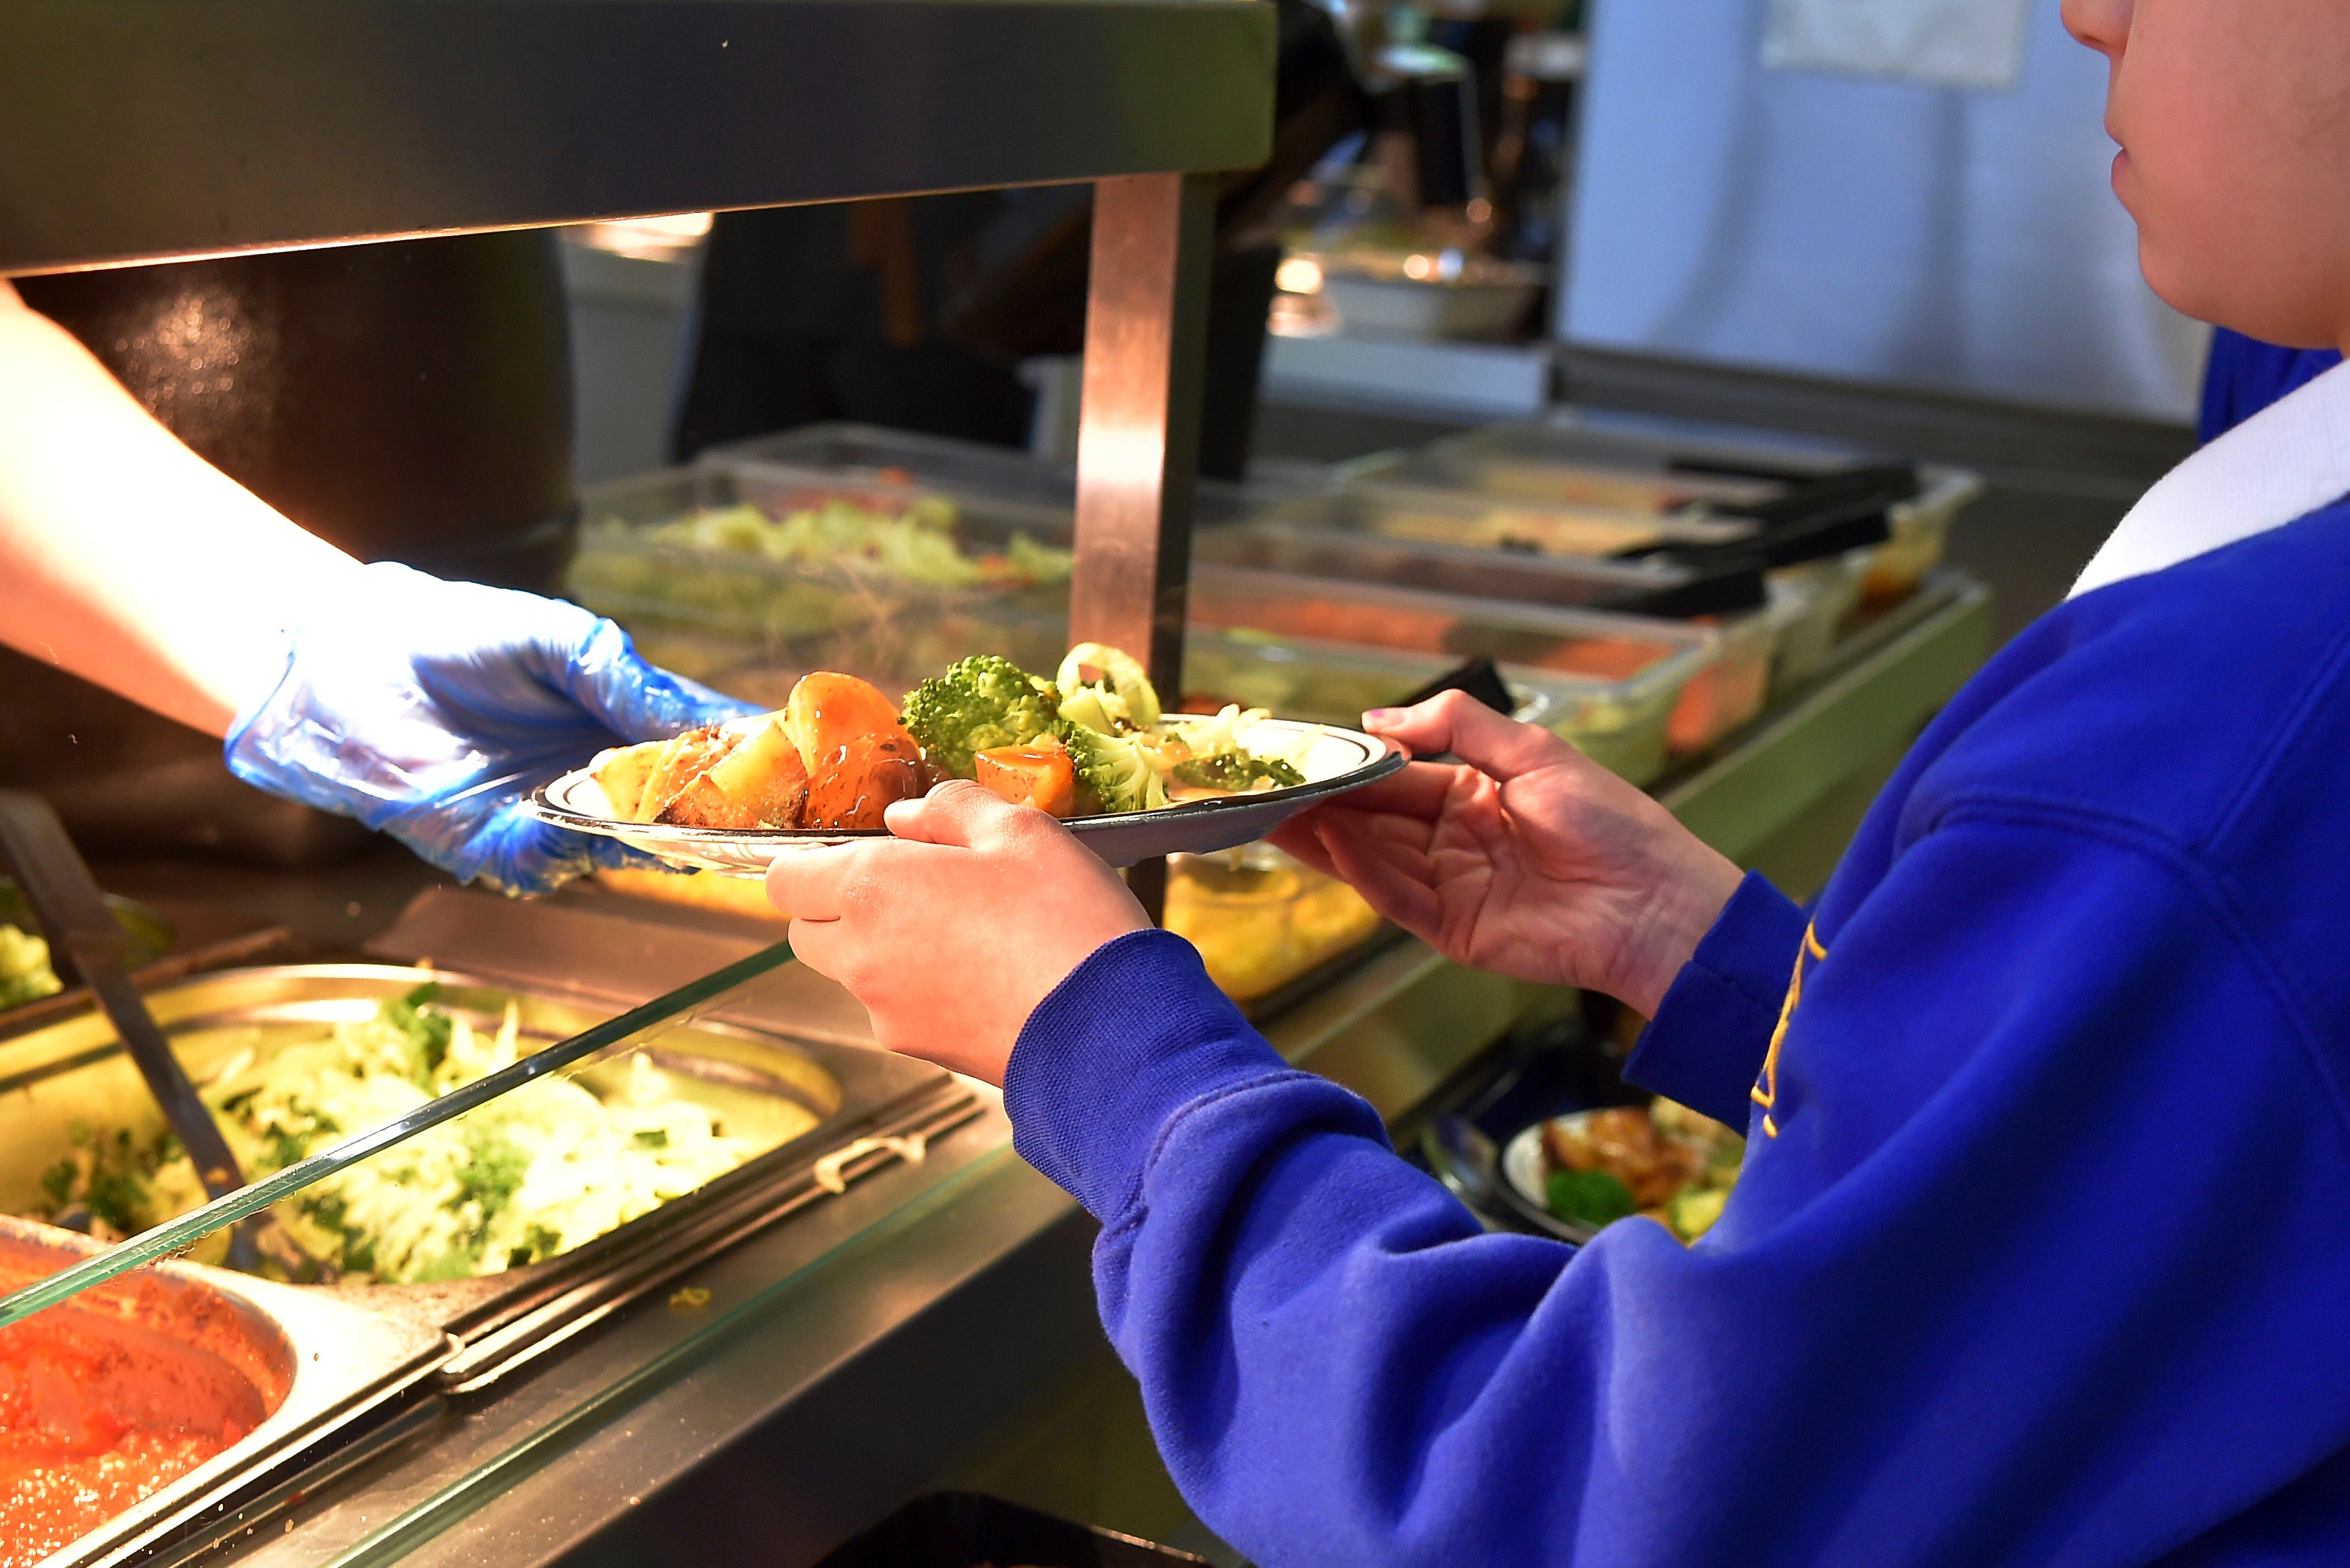 The government has been urged to expand free schools meals during holidays